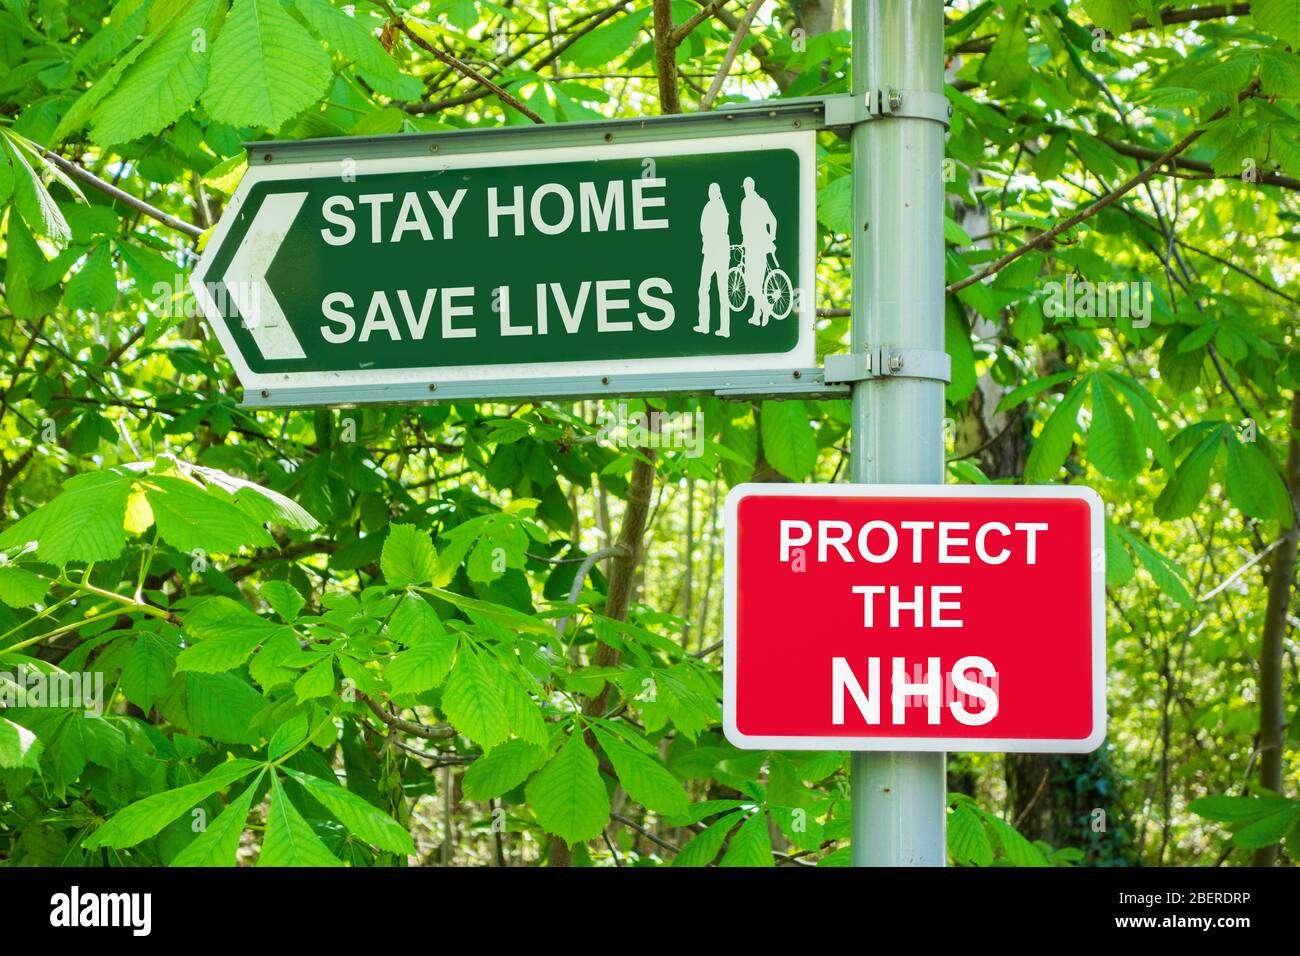 Stay home save lives protect the NHS, Coronavirus, exercise, social distancing, self isolation... concept. Stock Photo